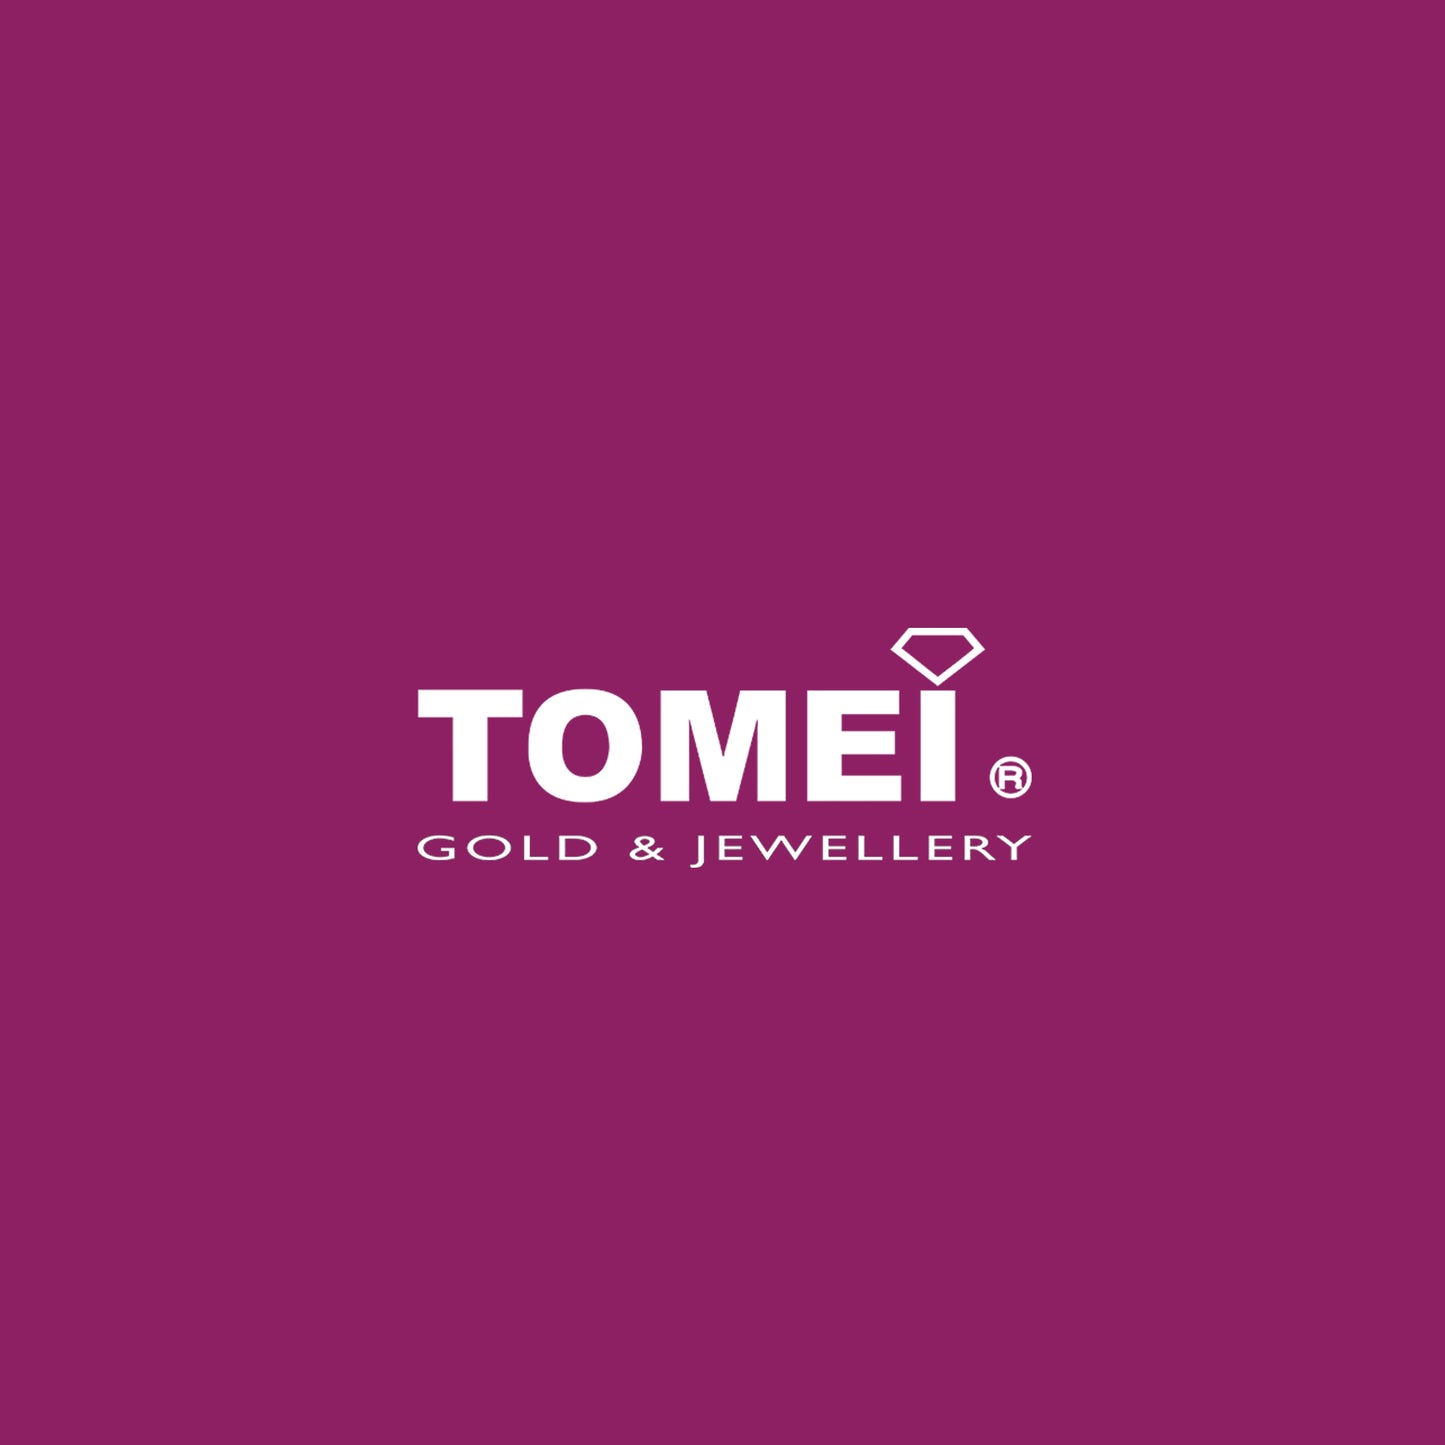 TOMEI Dreamcatcher Charm, Yellow Gold 916